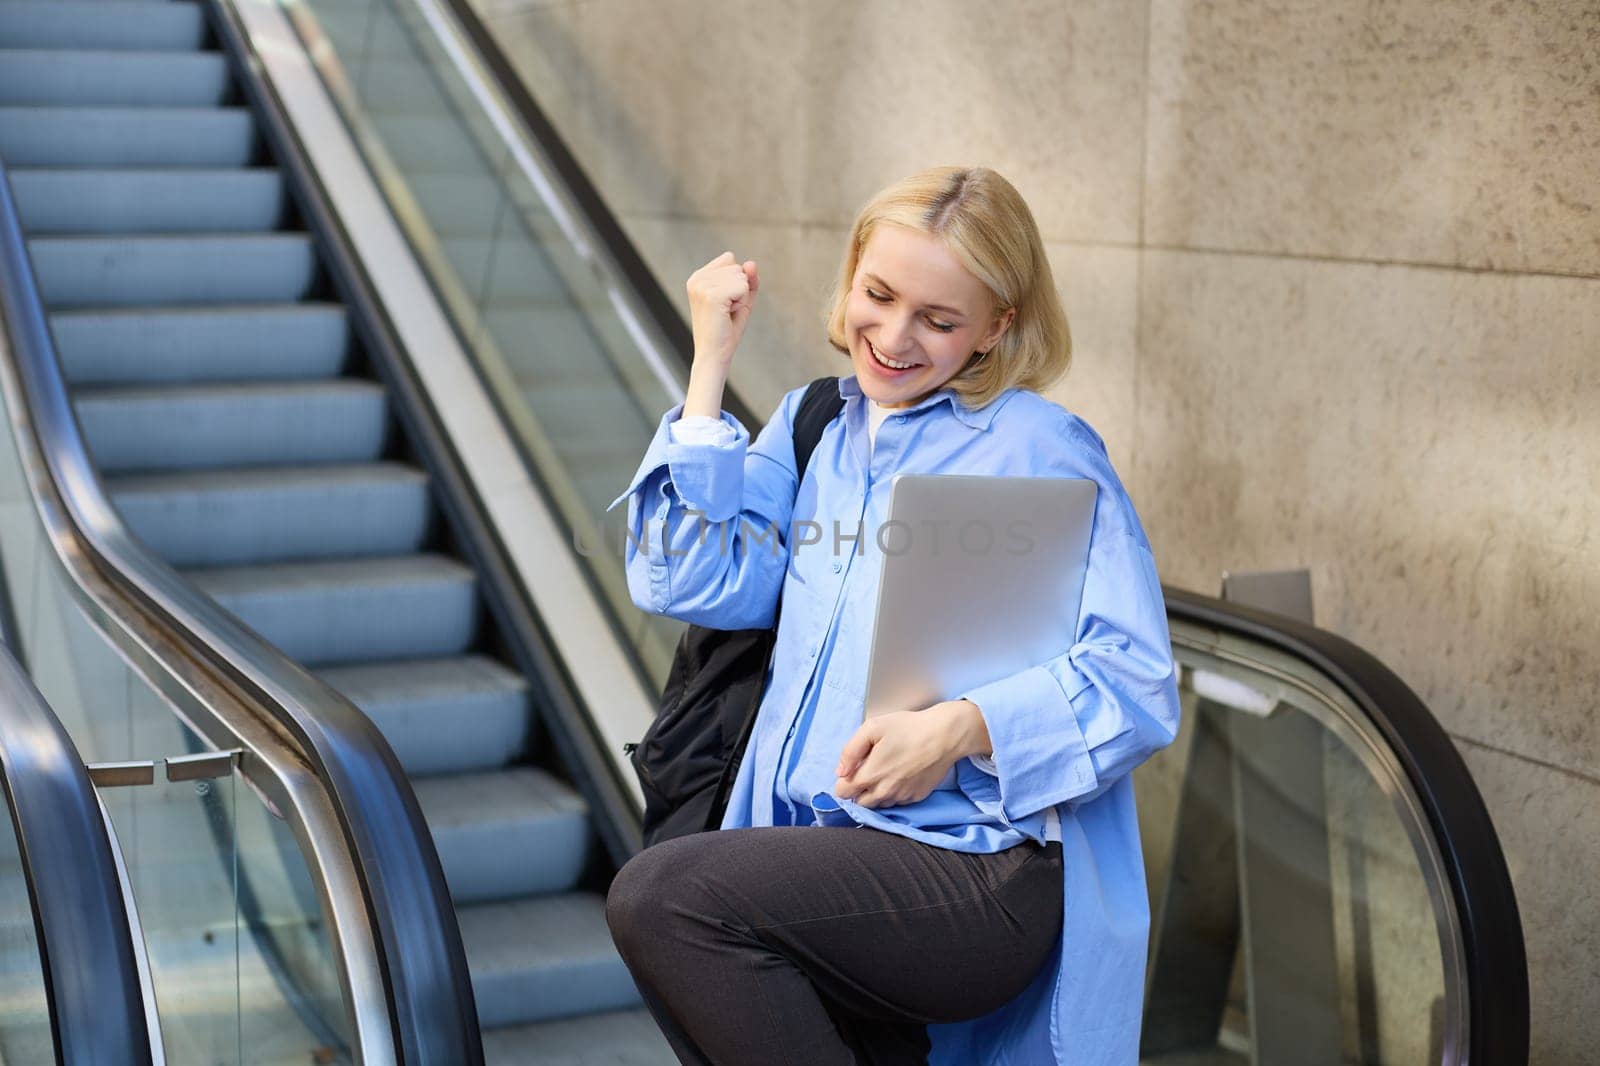 Excited young blond woman with backpack and laptop, says yes, winning, celebrating victory, achieve goal, posing near escalator. Lifestyle concept